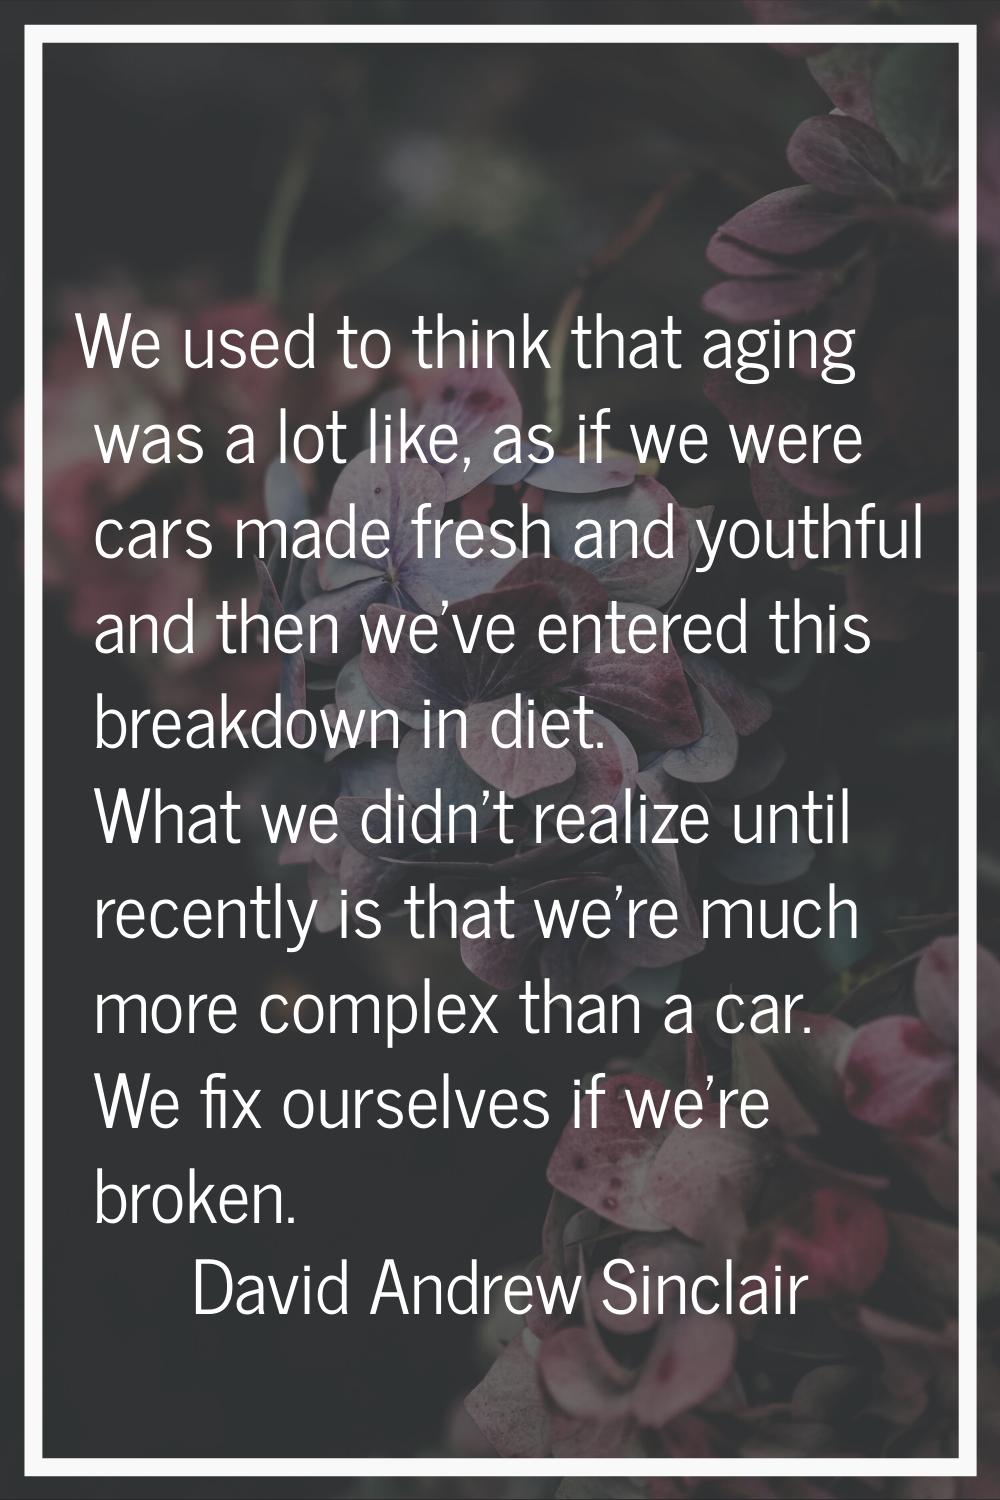 We used to think that aging was a lot like, as if we were cars made fresh and youthful and then we'